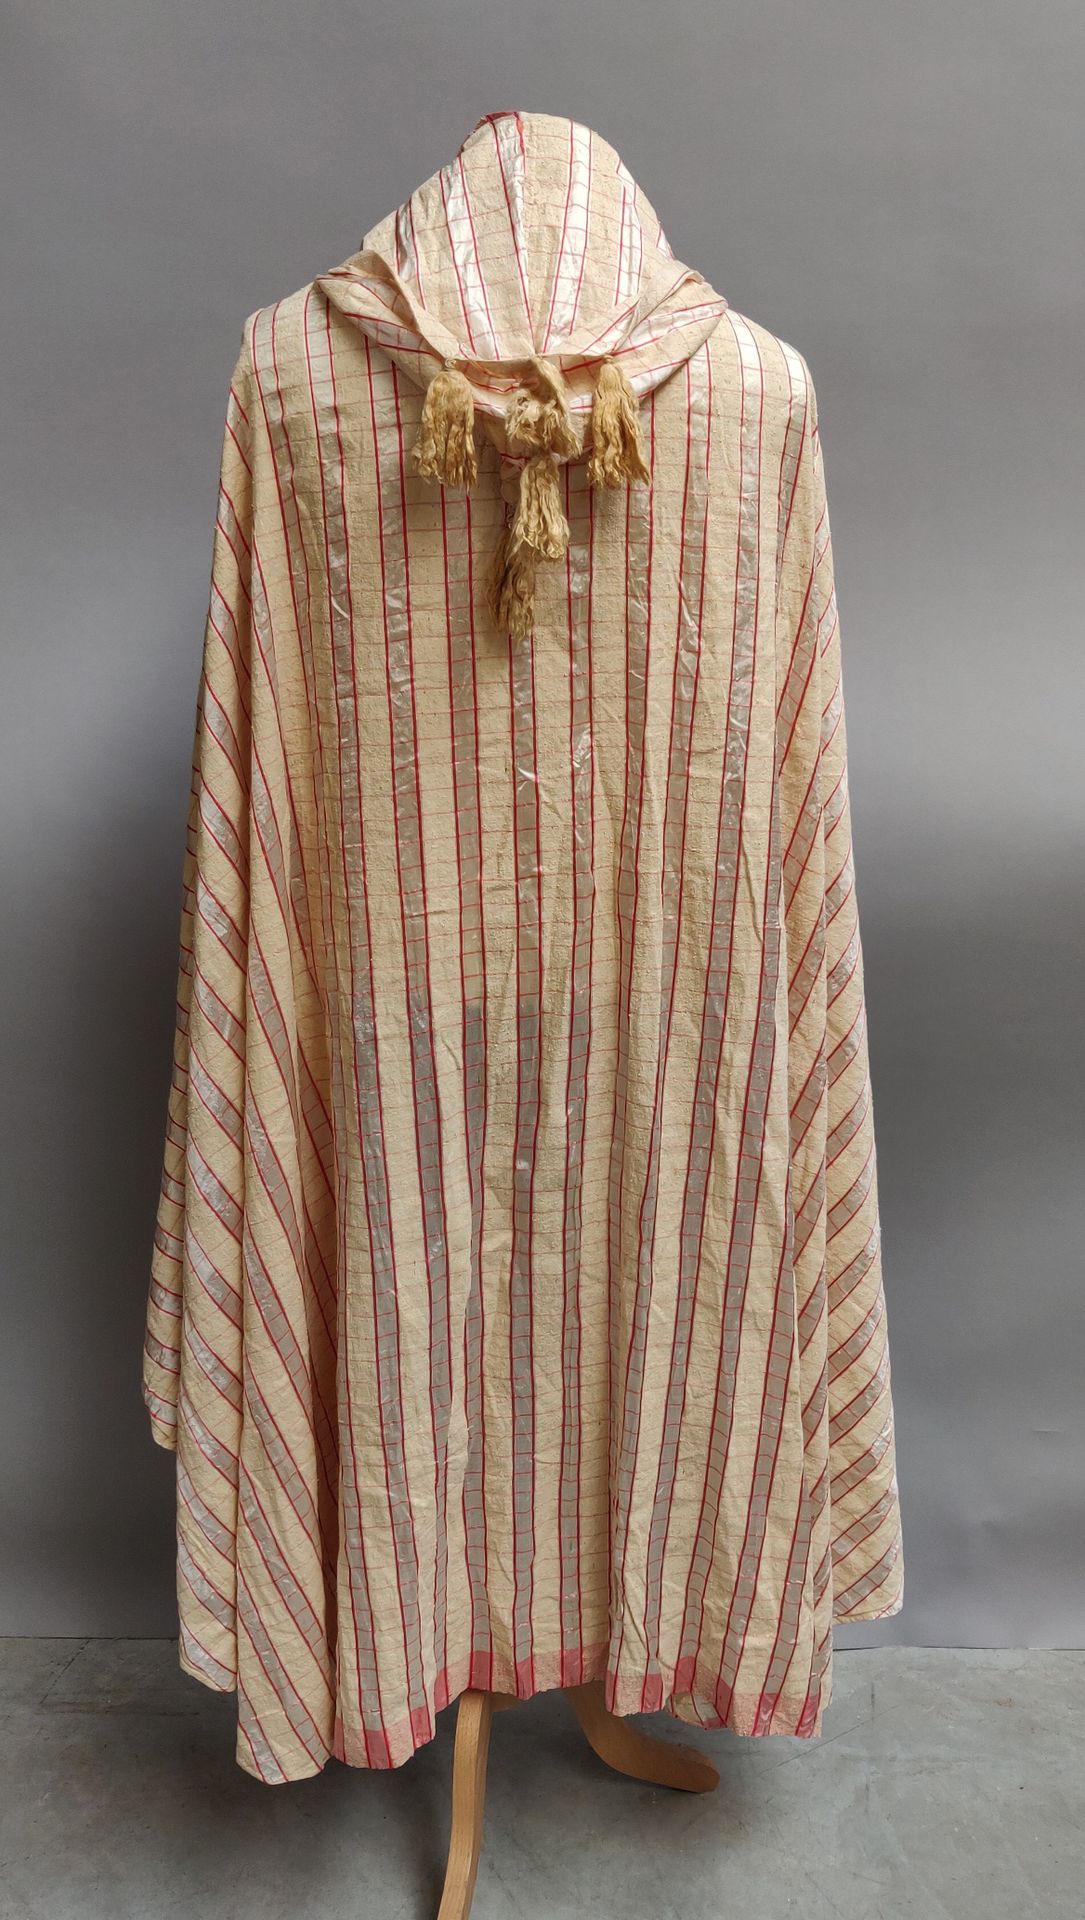 Null Coat called Burnous in striped silk, early 20th century.